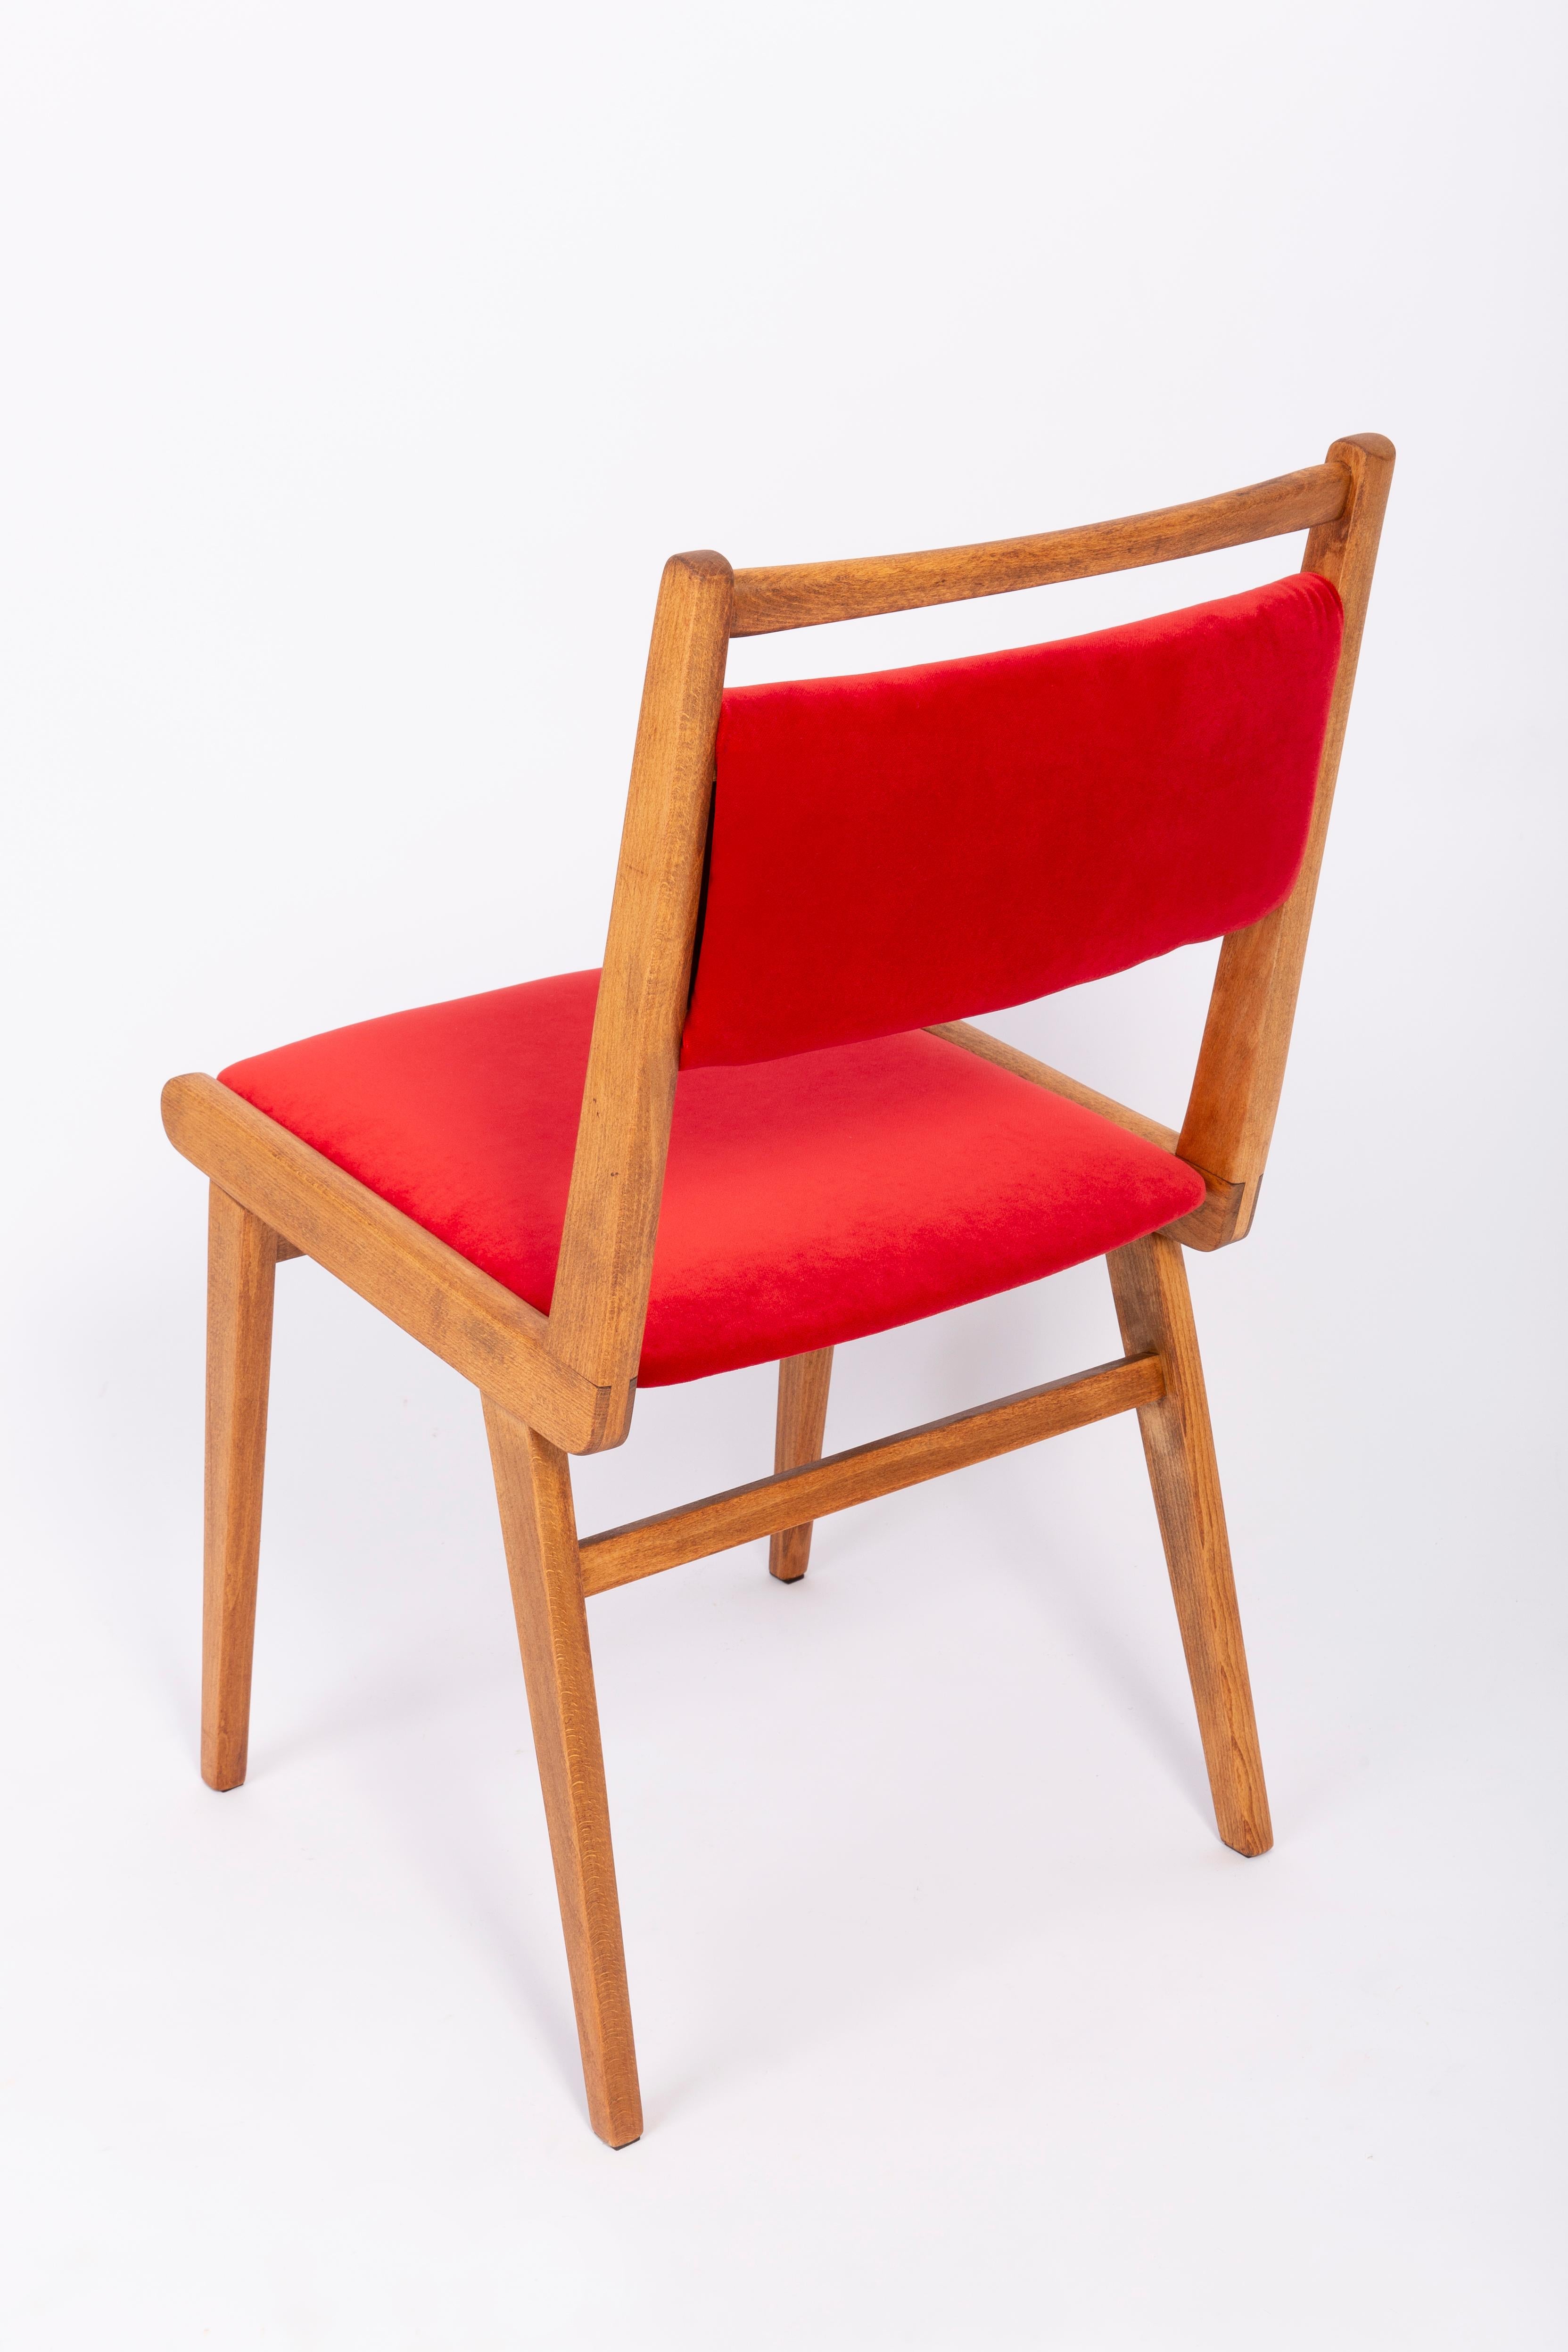 Set of Four 20th Century Red Velvet Chairs, by Rajmund Halas, Poland, 1960s For Sale 2